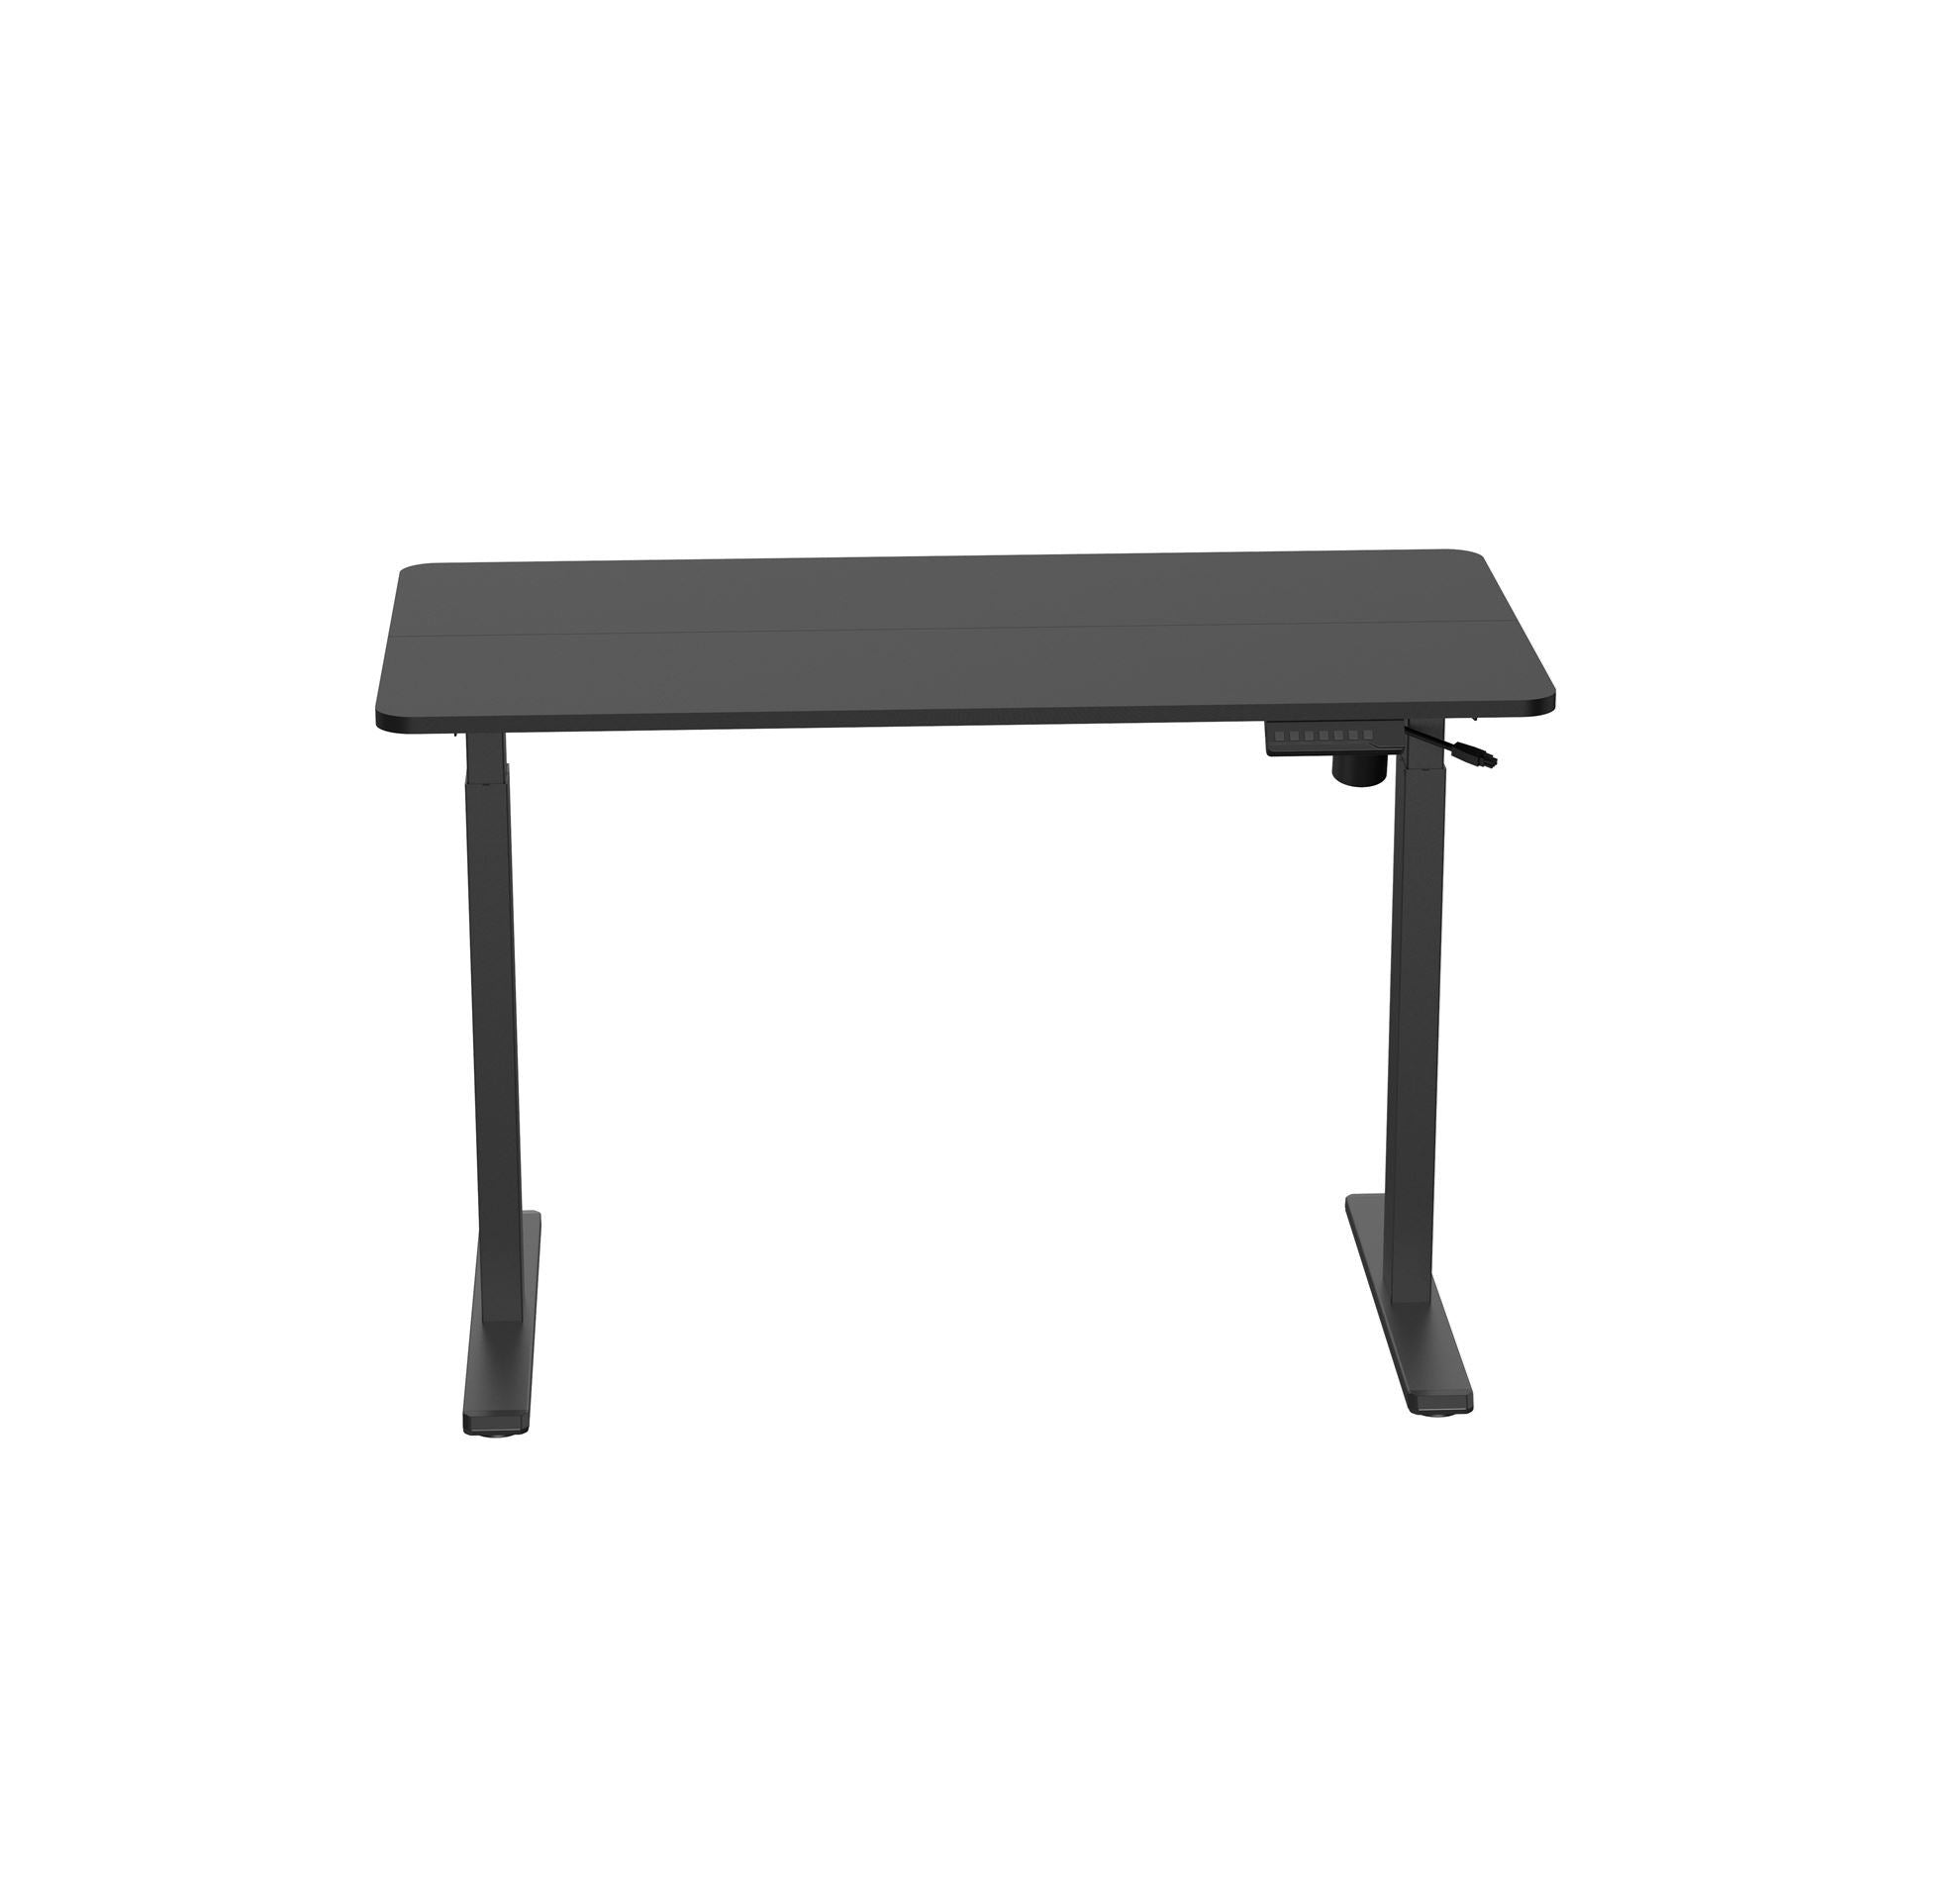 BRATECK_Compact_Single_Motor_Electric_Sit-Stand_Desk_with_Desktop_Included._Width_1200x600mm,_Height_Range_730-1210mm,_Weight_Cap_70Kgs,_3_memory_Settings,_Timer_Reminder._Black_Colour.